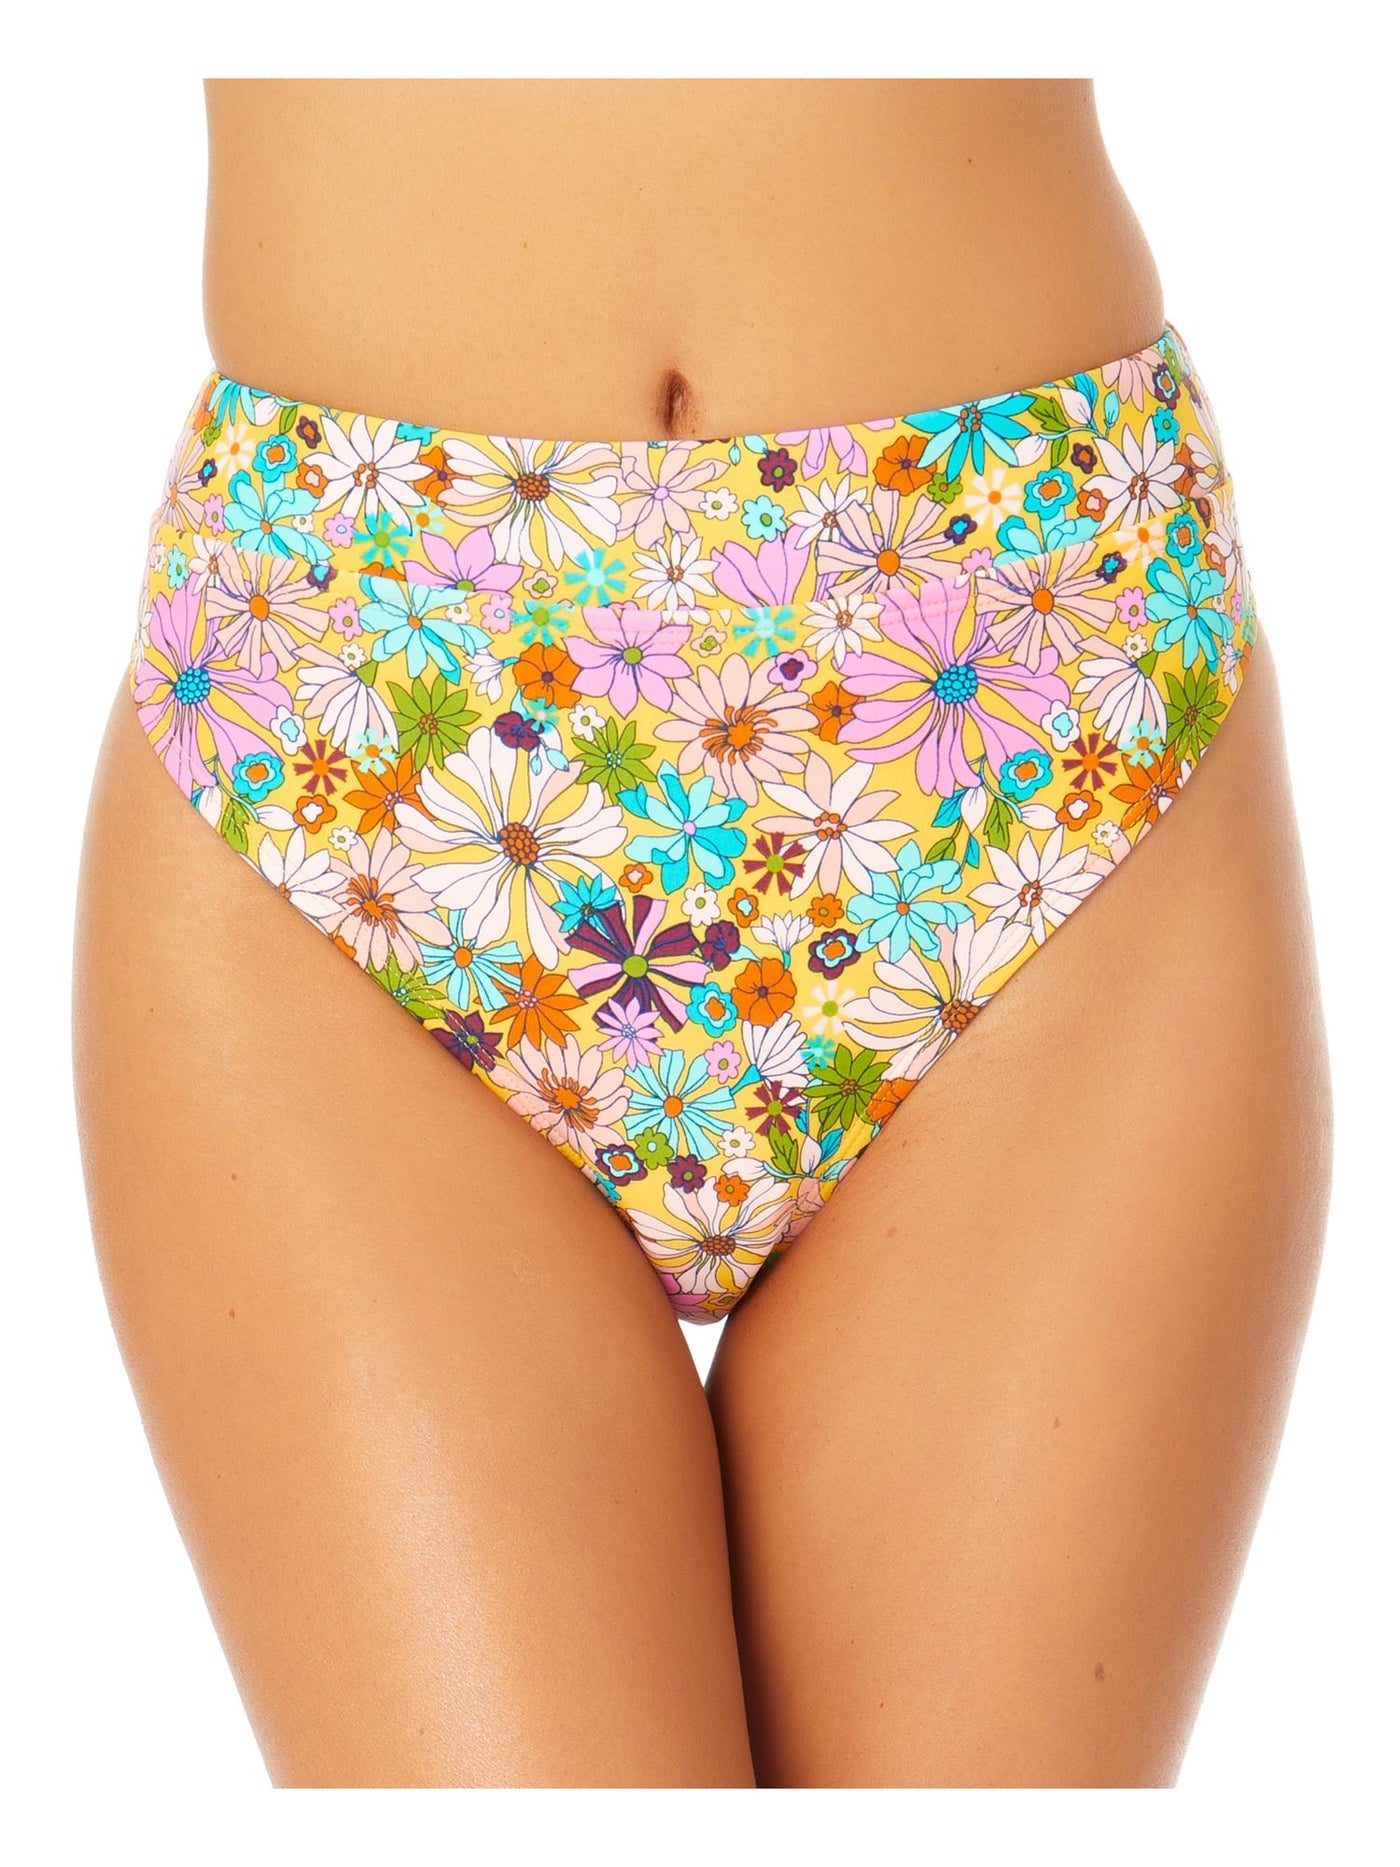 CALIFORNIA SUNSHINE Women's Multi Color Floral Stretch Banded High-Leg Lined Bikini Moderate Coverage High Waisted Swimsuit Bottom M